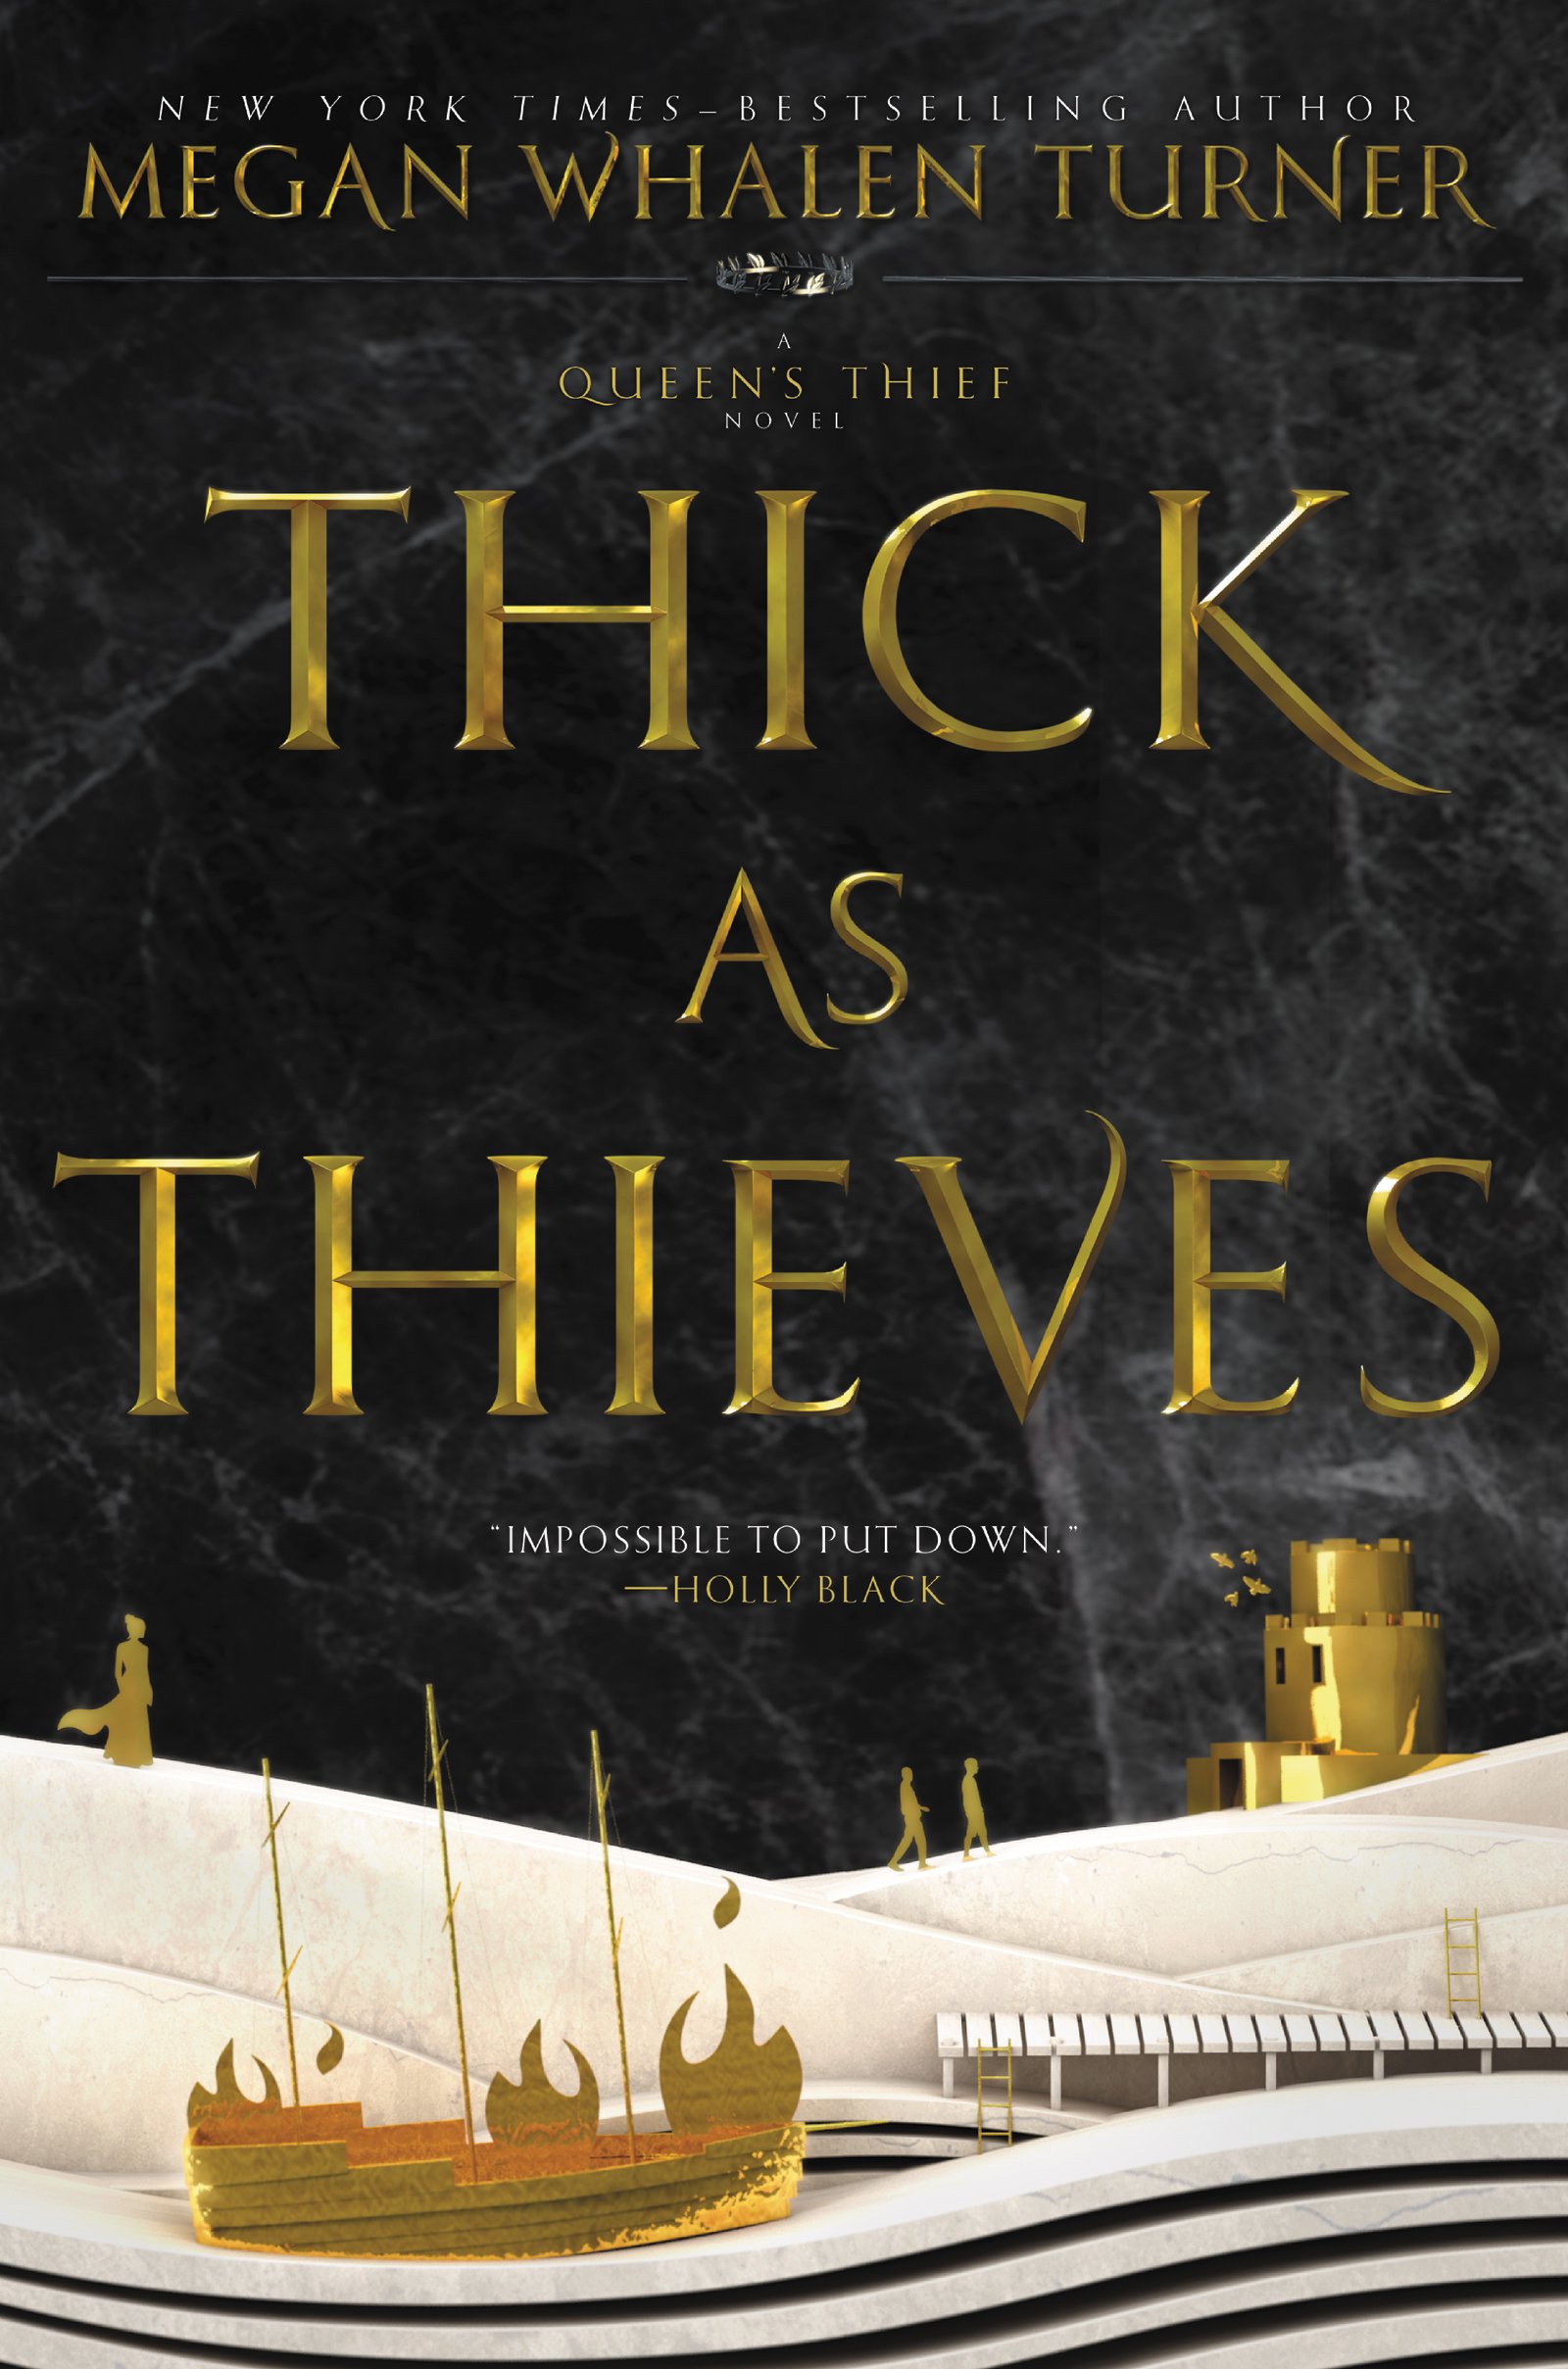 Thick As Thieves | Megan Whalen Turner image0